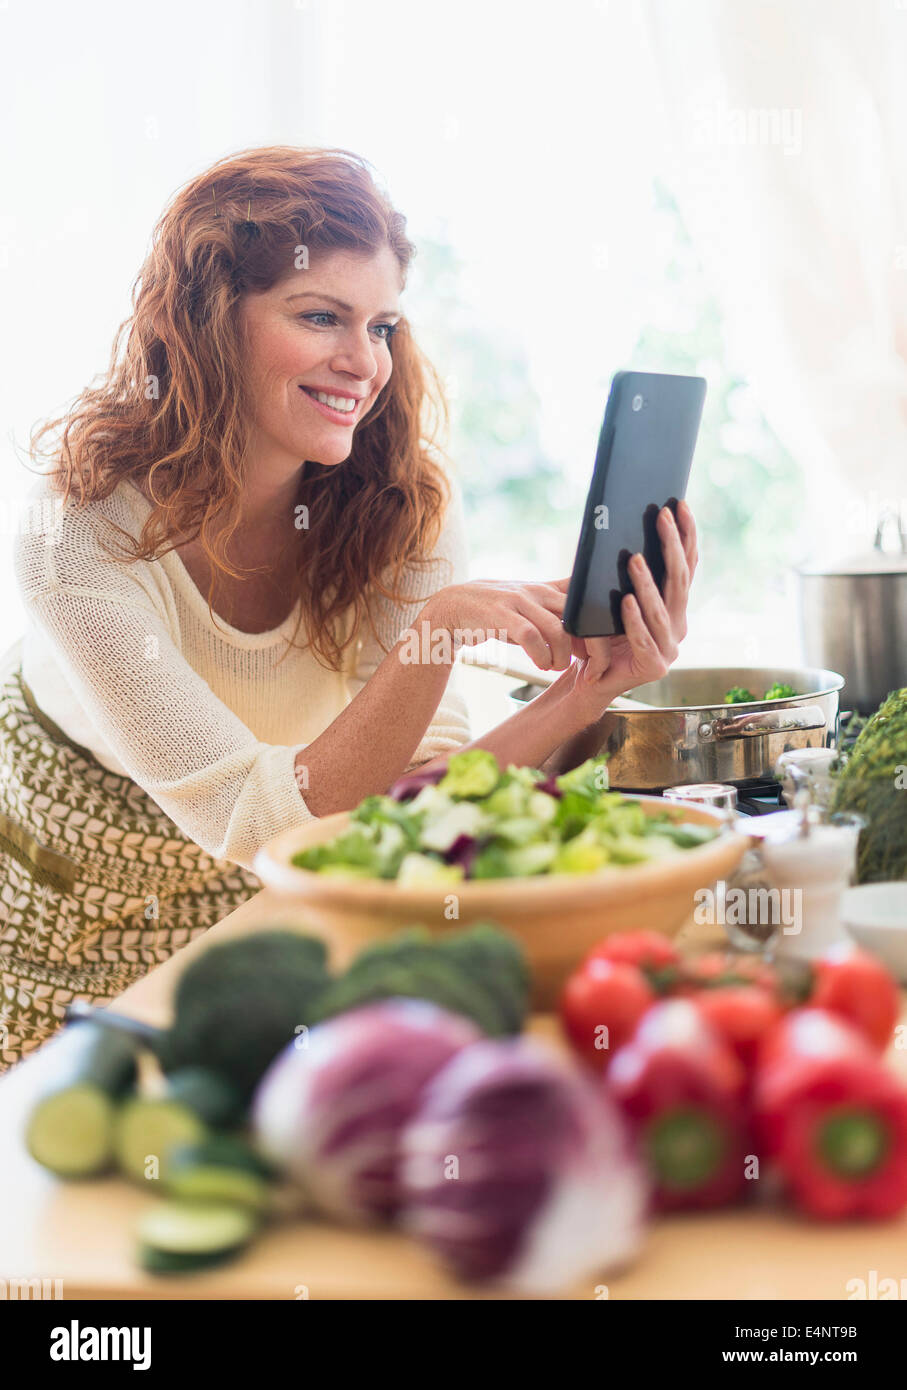 Woman cooking and using digital tablet in kitchen Stock Photo